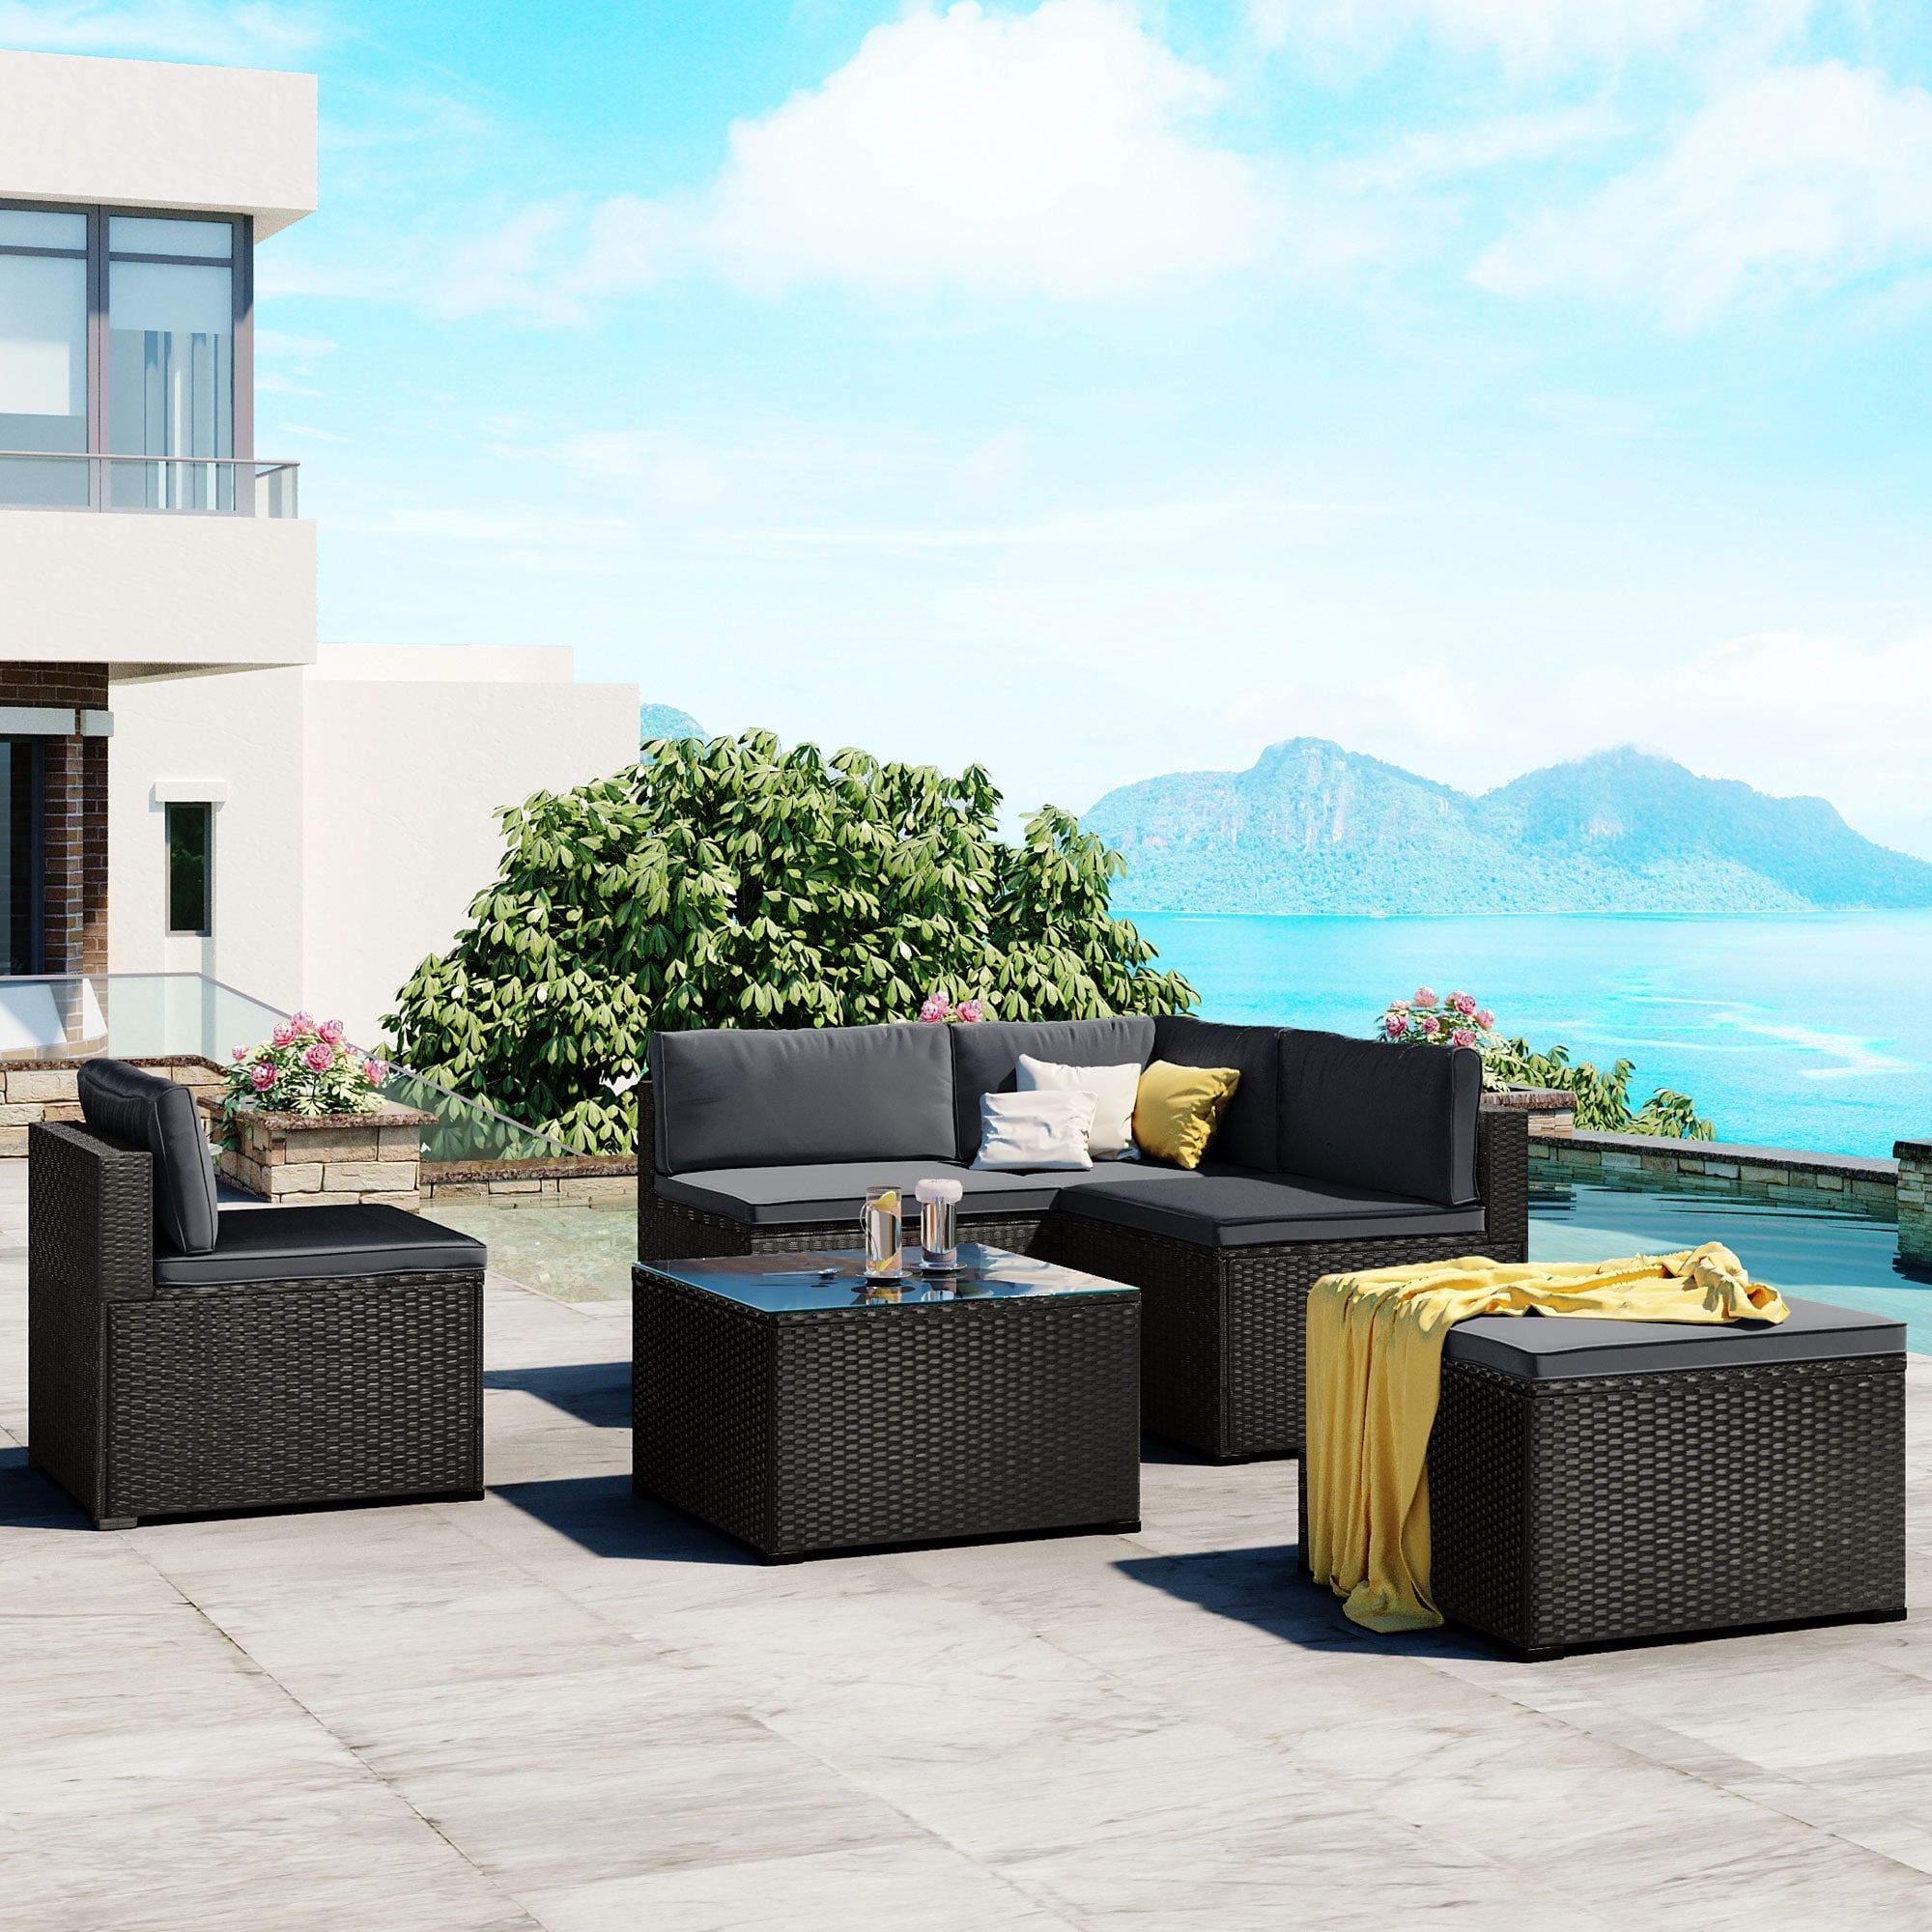 Gray 6-piece Outdoor Patio Wicker Rattan Modular Sectional Sofa Set  With Glass Tabletop Coffee Table  Removable Grey Cushion